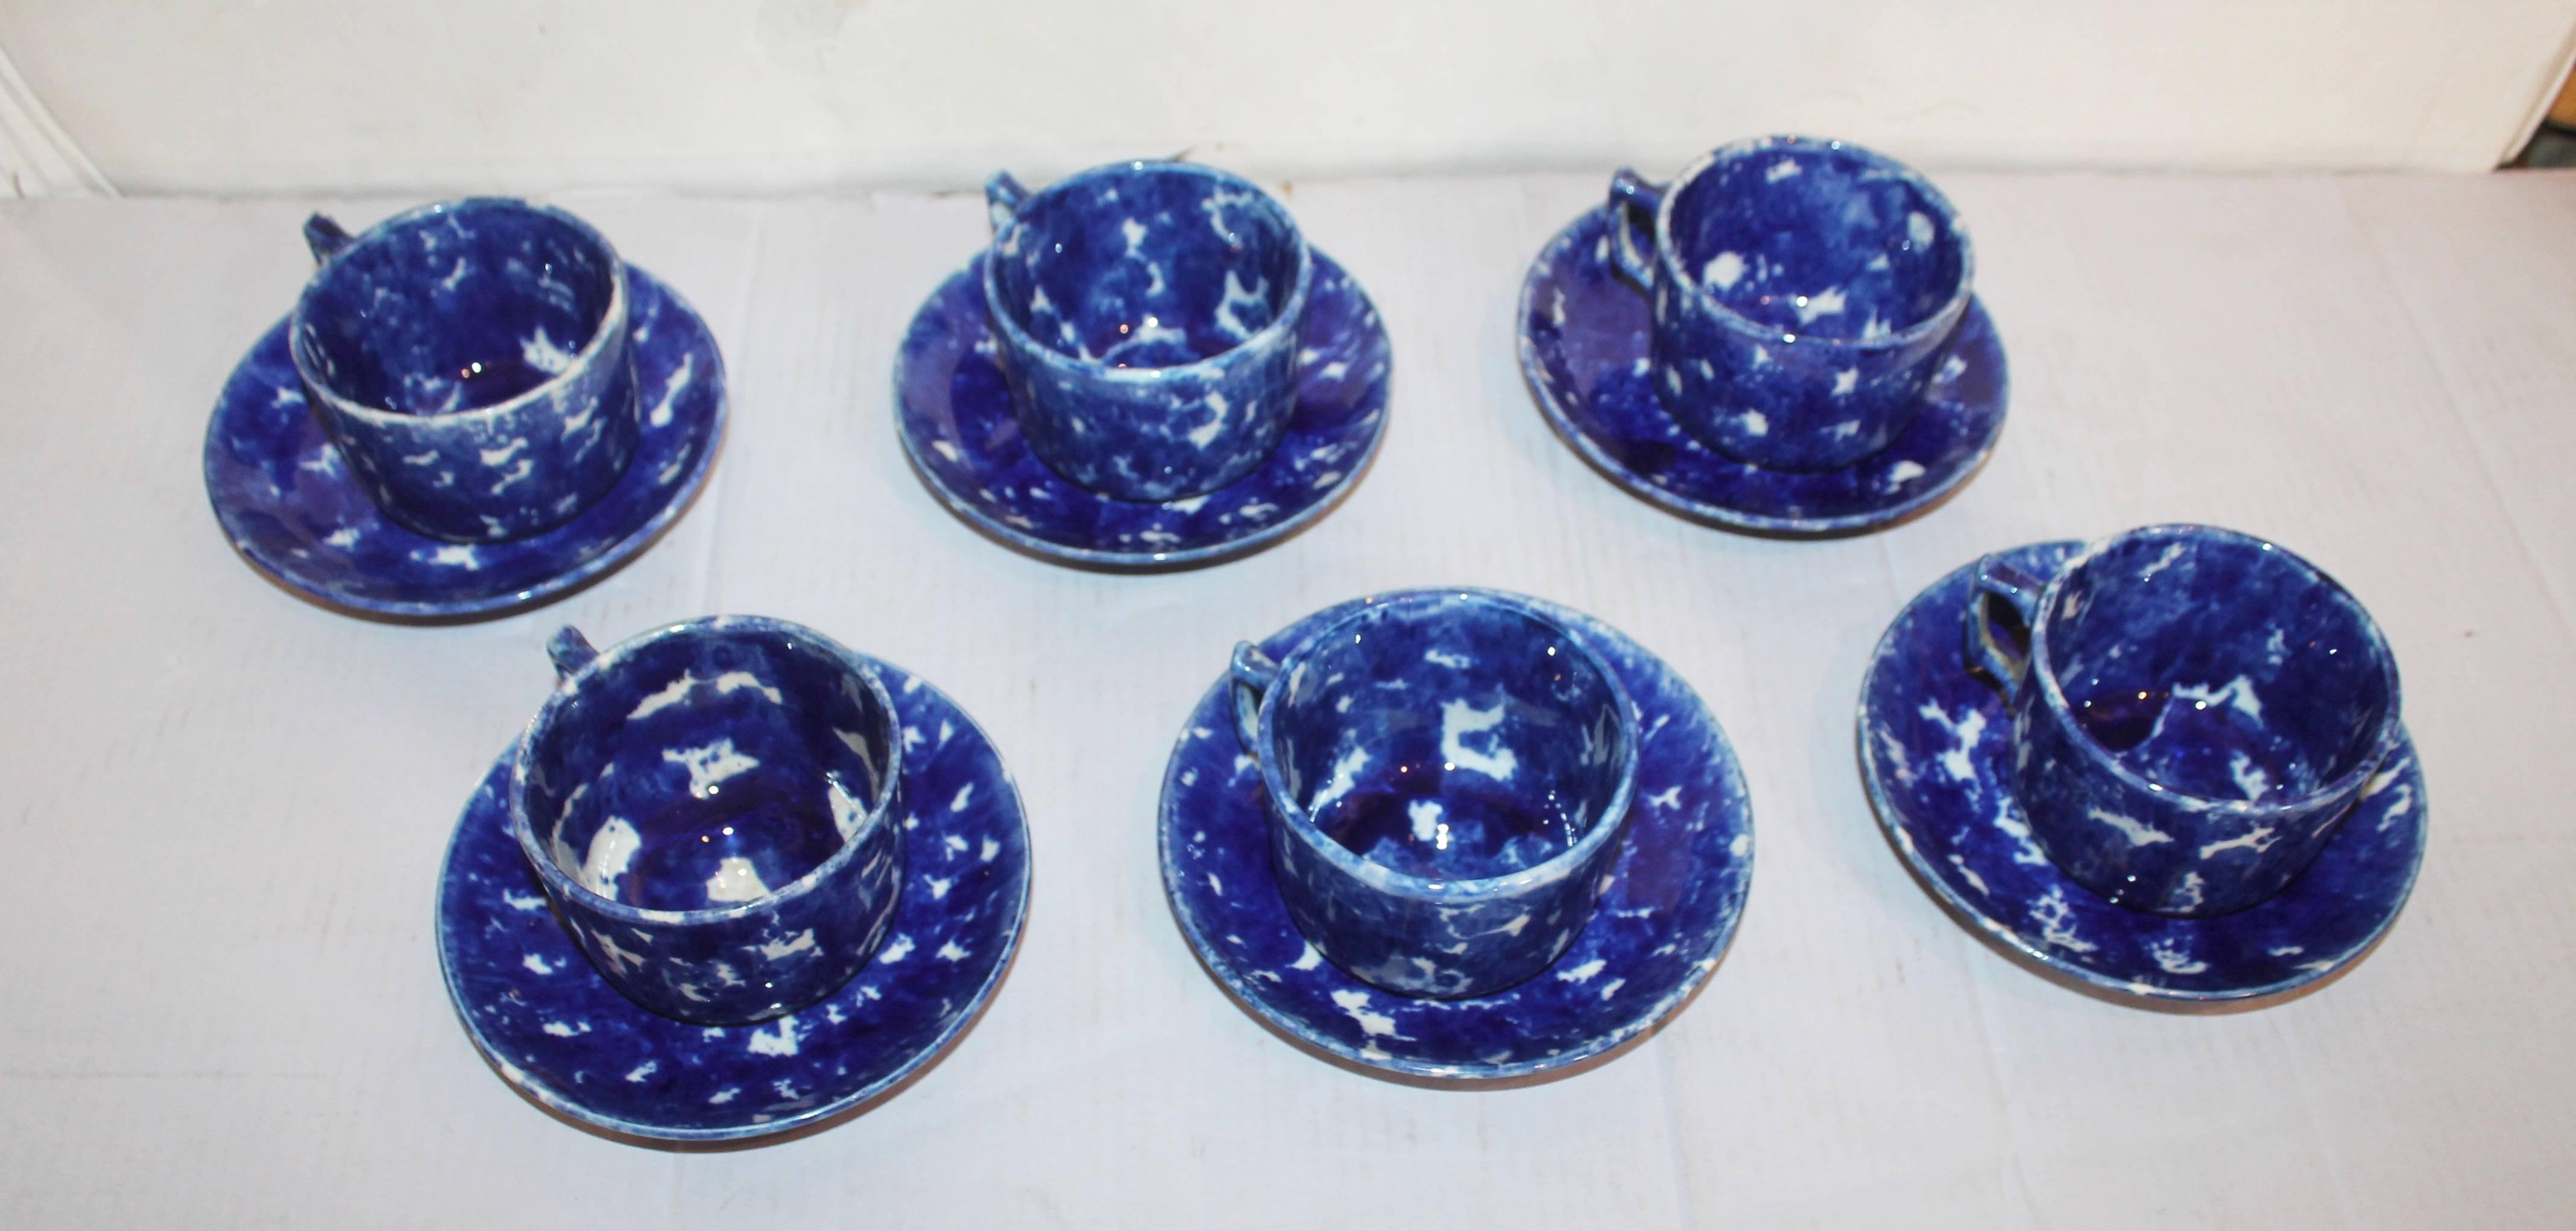 This collection of six matching 19th century spongeware pottery cups and saucers are in pristine condition. Everything is in pristine condition. Total of 12 pieces in the collection.